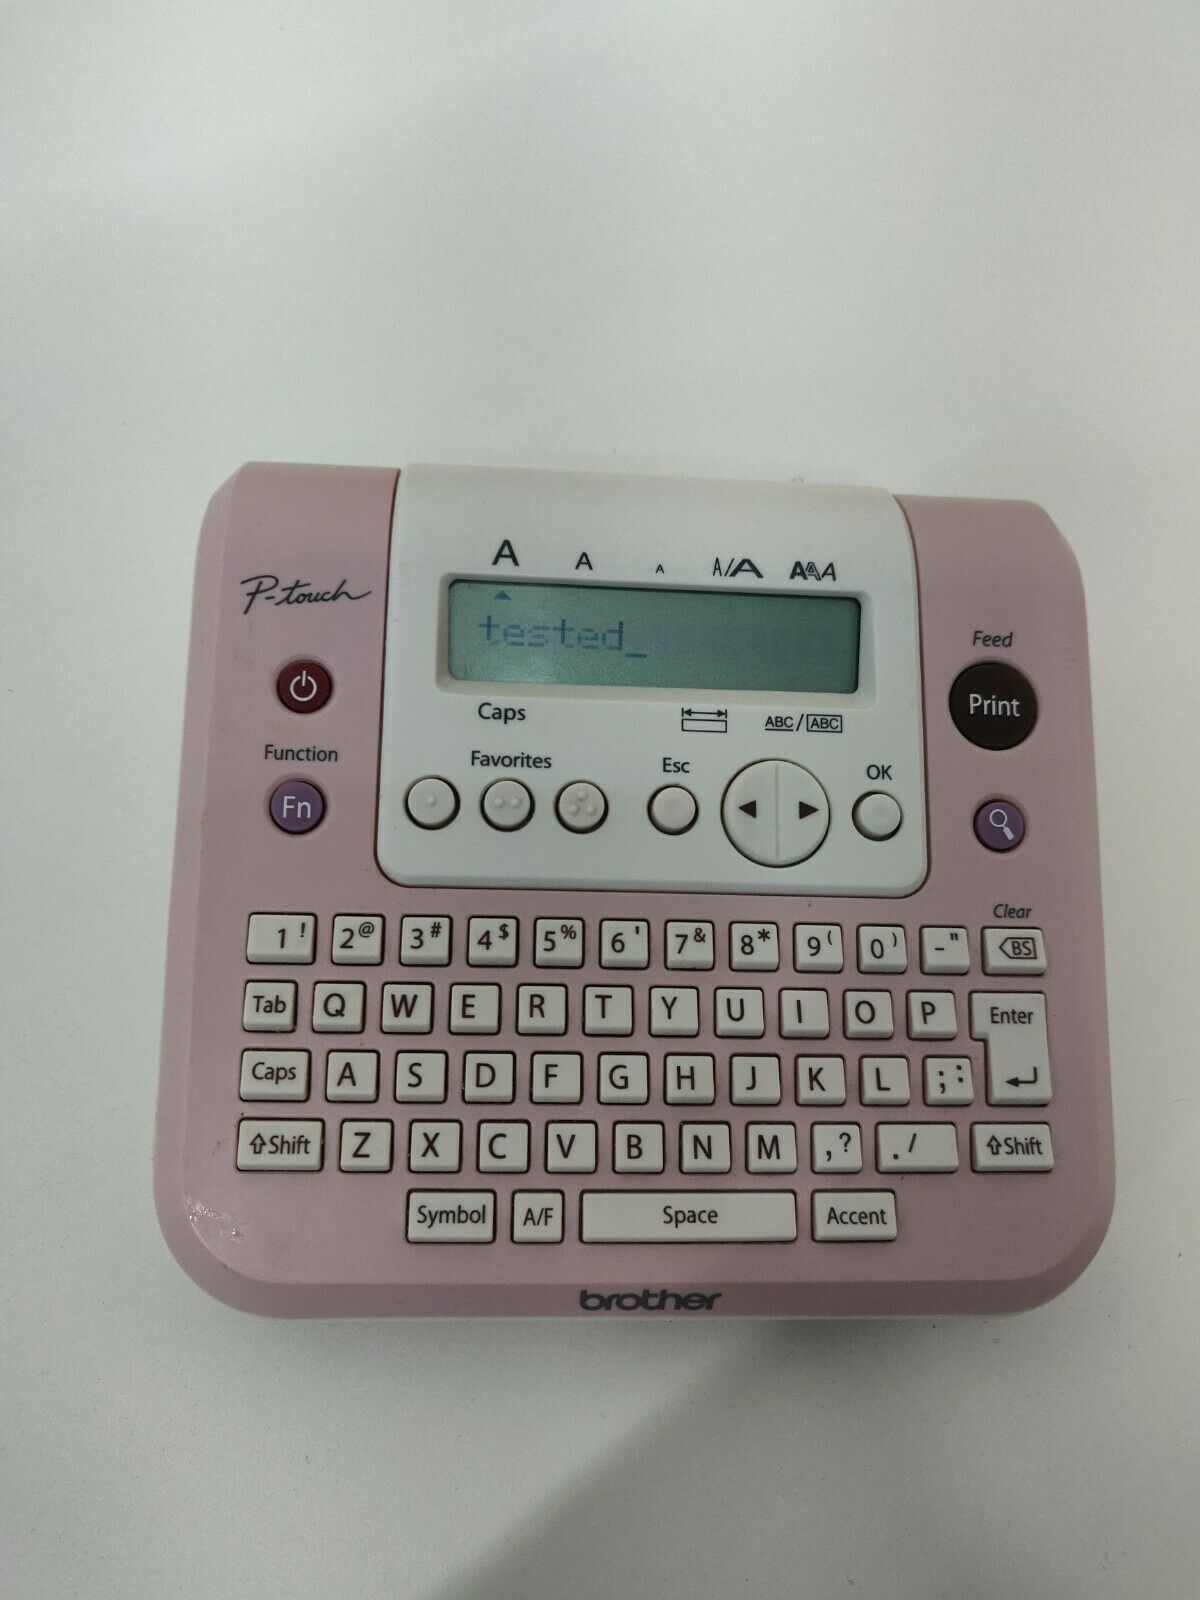 Brother Pt-128af Thermal Label Maker Printer Pink - See Pictures Small Scuffs